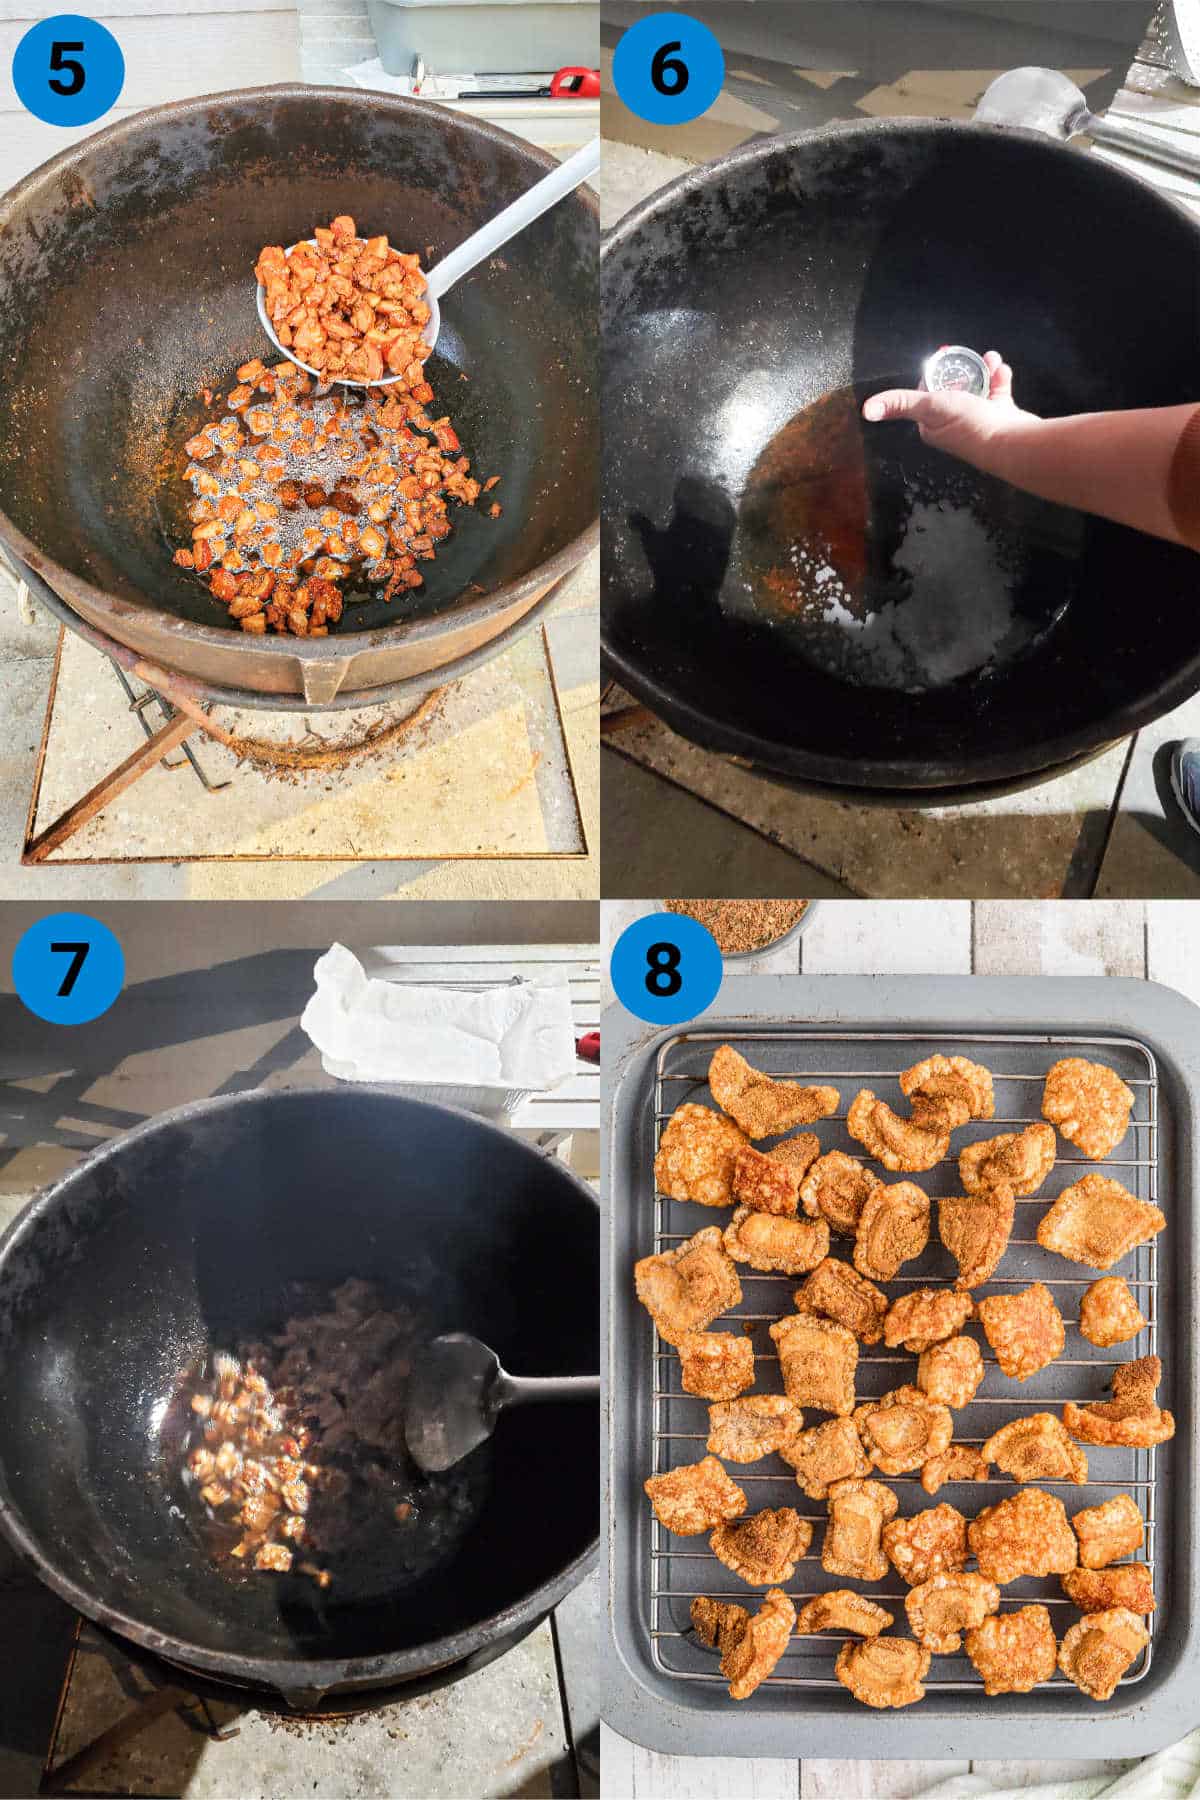 A collage of four images showing how to make homemade cracklins recipe steps 5 through 8.